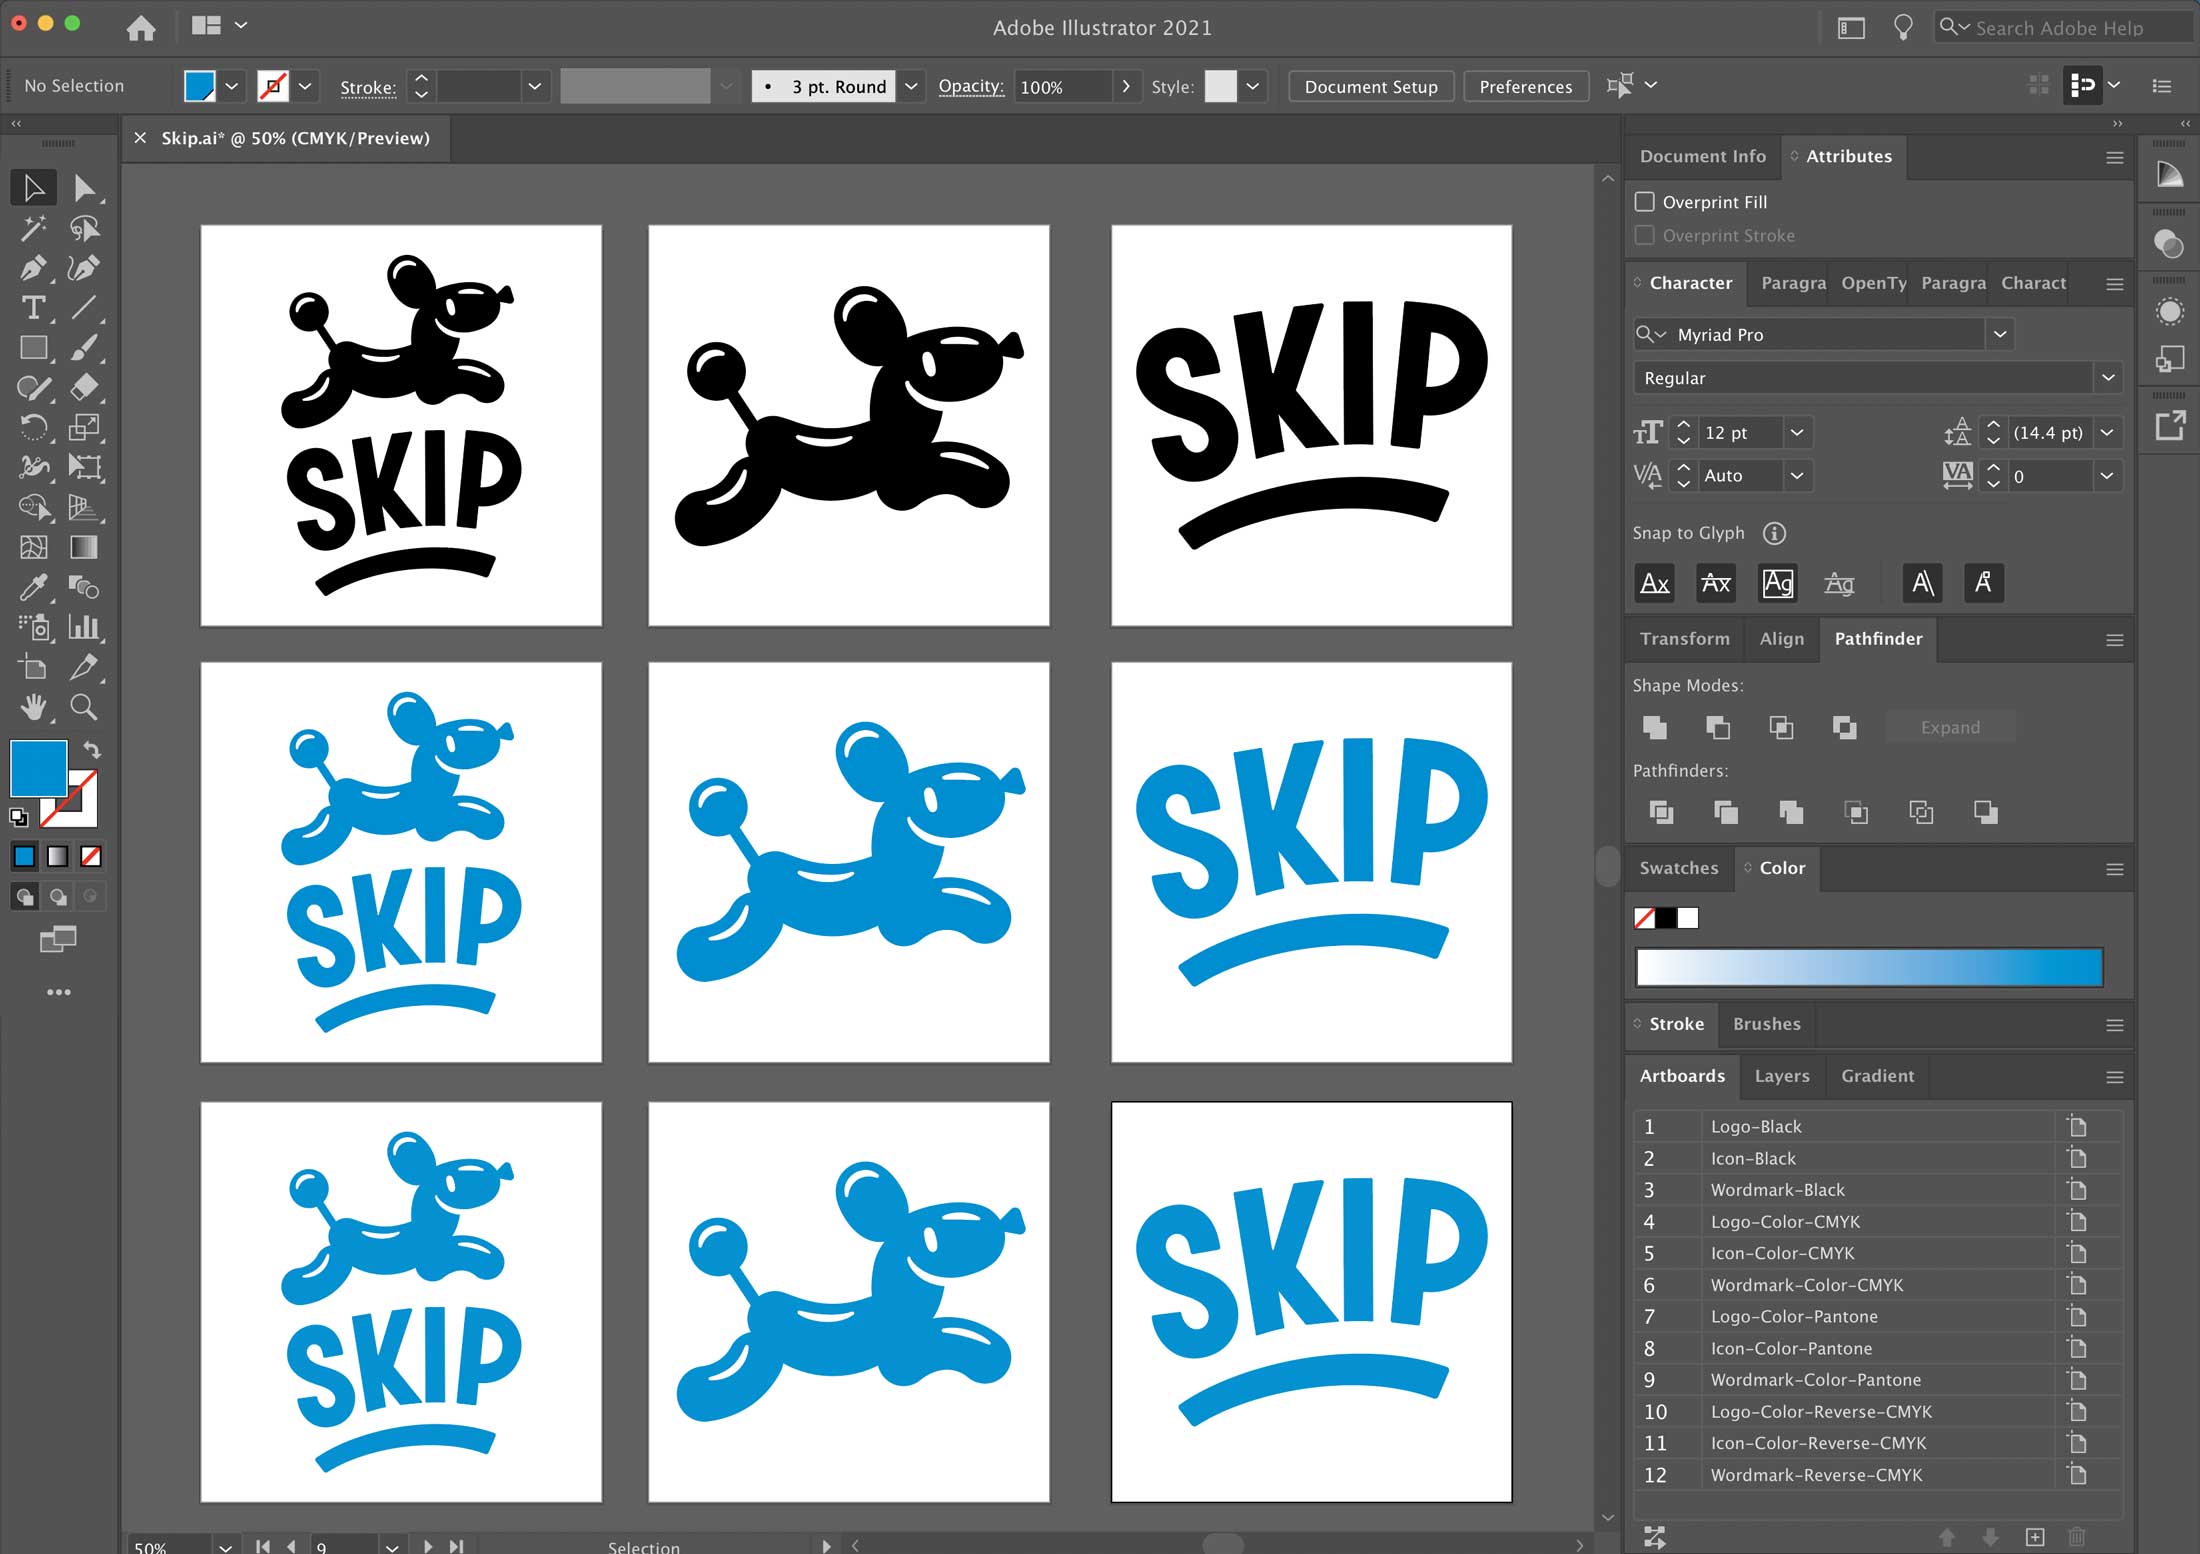 Create and name your Illustrator artboards for each logo variation to be exported.